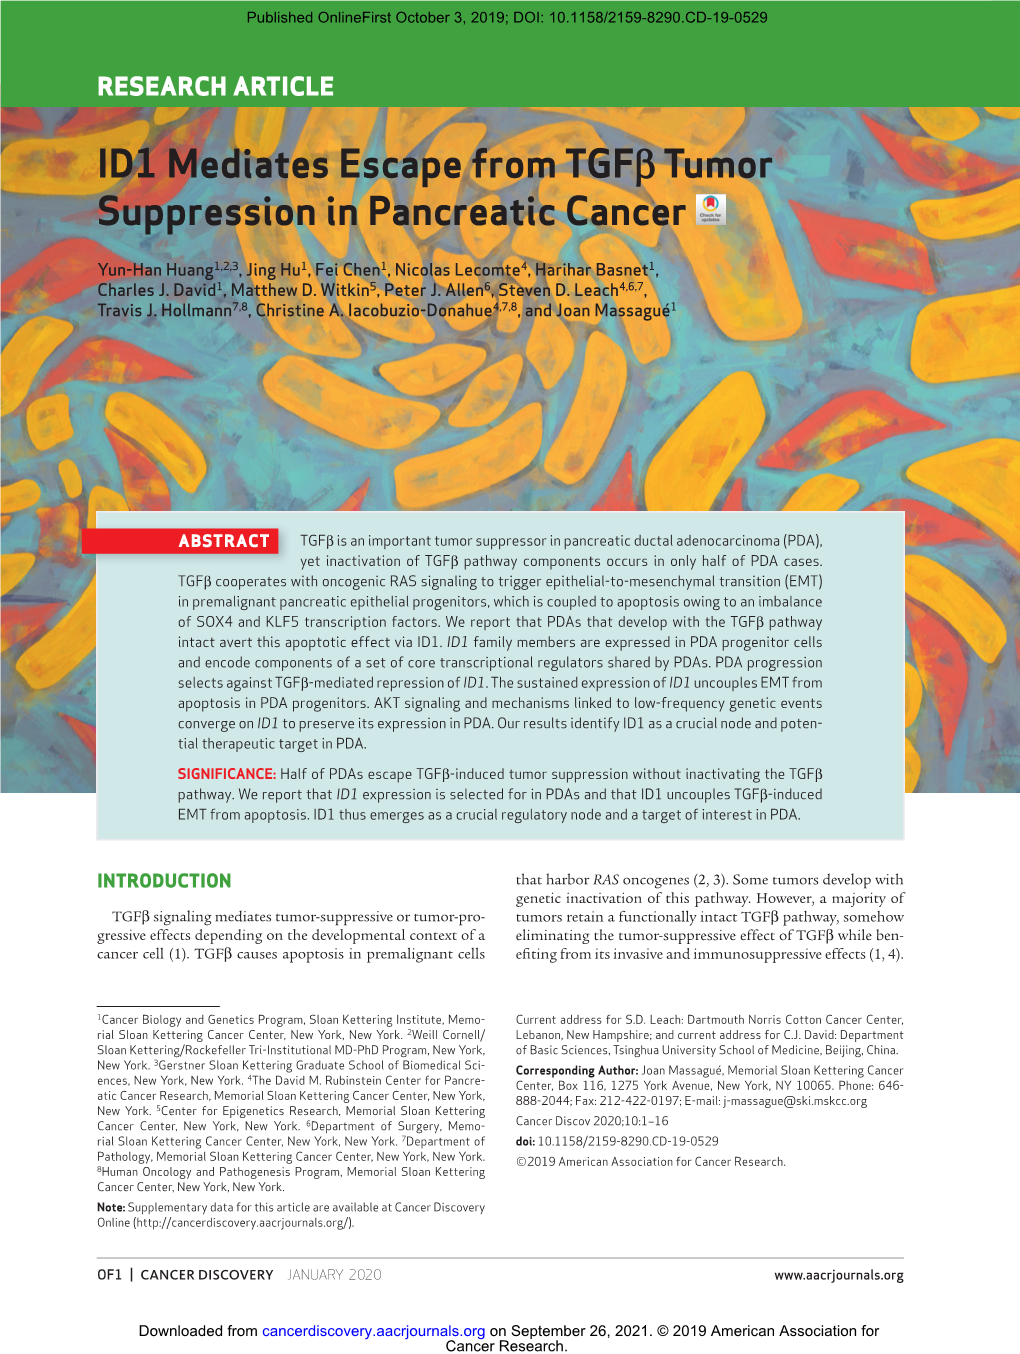 ID1 Mediates Escape from Tgfβ Tumor Suppression in Pancreatic Cancer